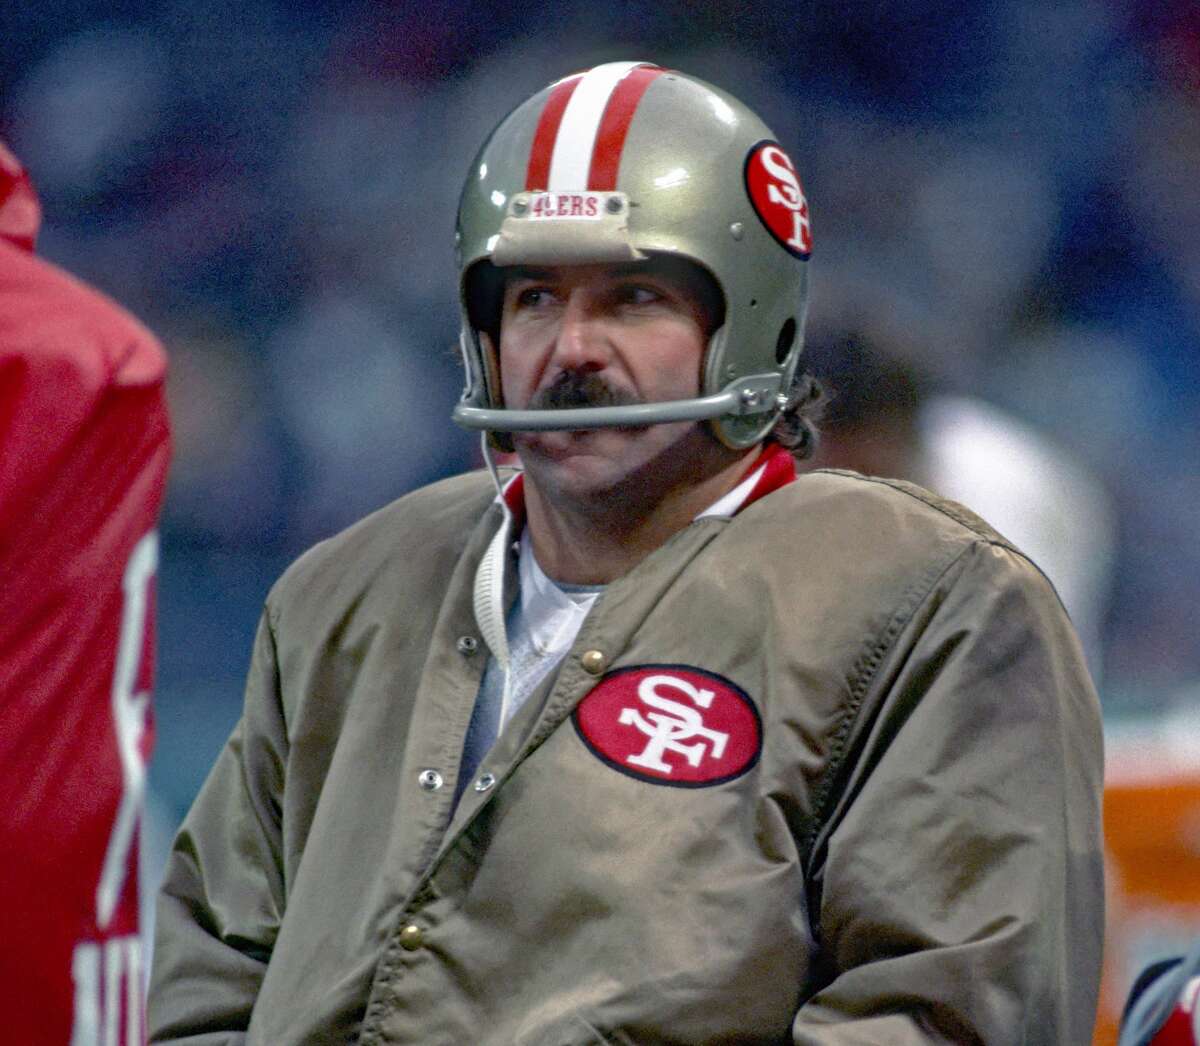 San Francisco 49ers kicker Ray Wersching, wearing the team jacket that inspired Chalk Line's gold satin Niners jackets, looks on from the sideline during a 1984 game against the Cleveland Browns in Cleveland, Ohio.